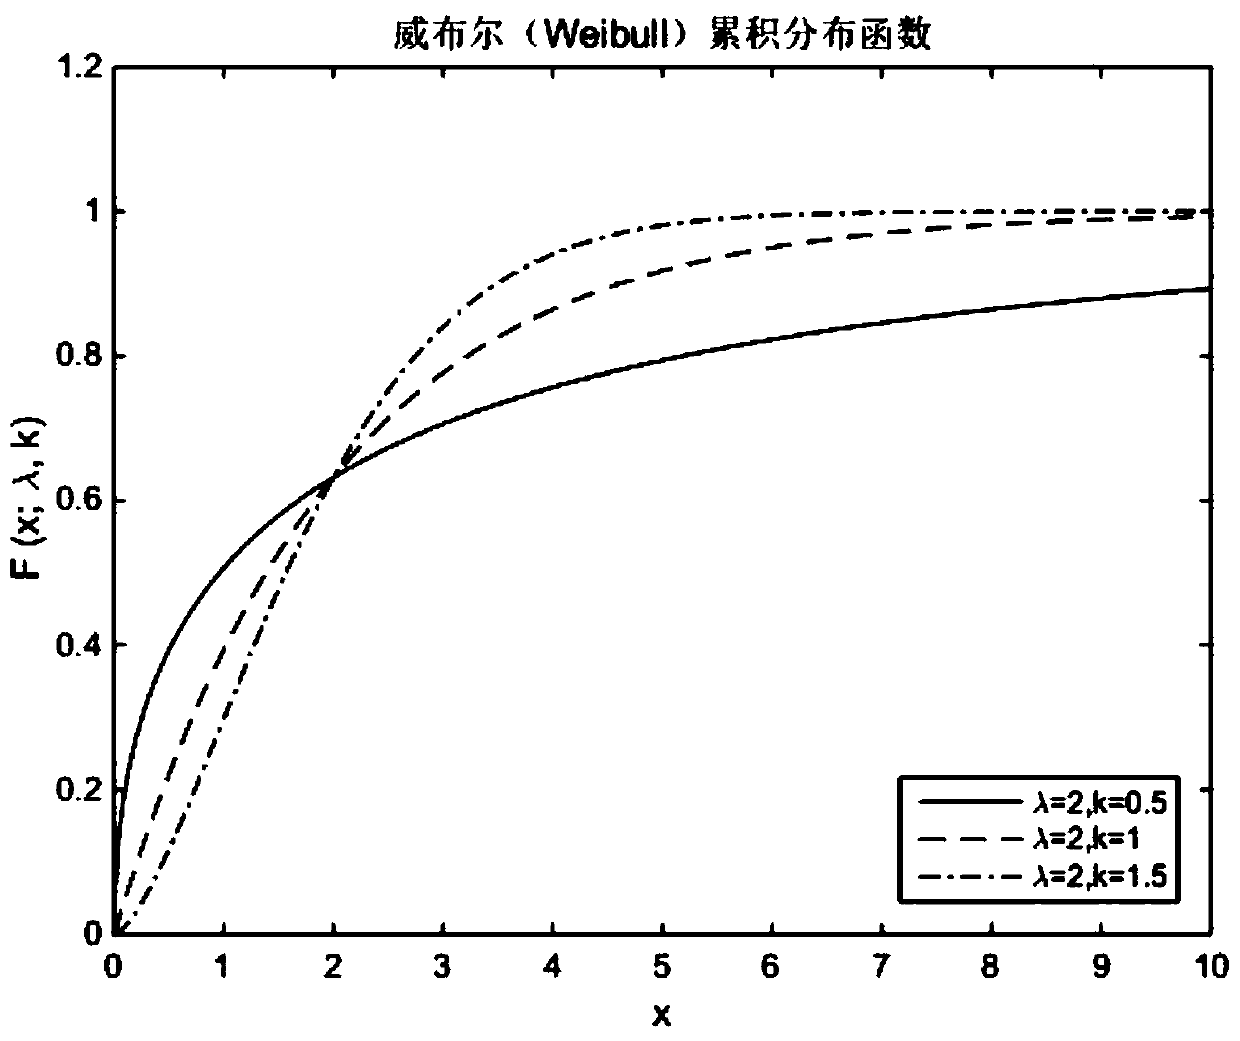 A software reliability growth model for introducing faults based on Weibull distribution